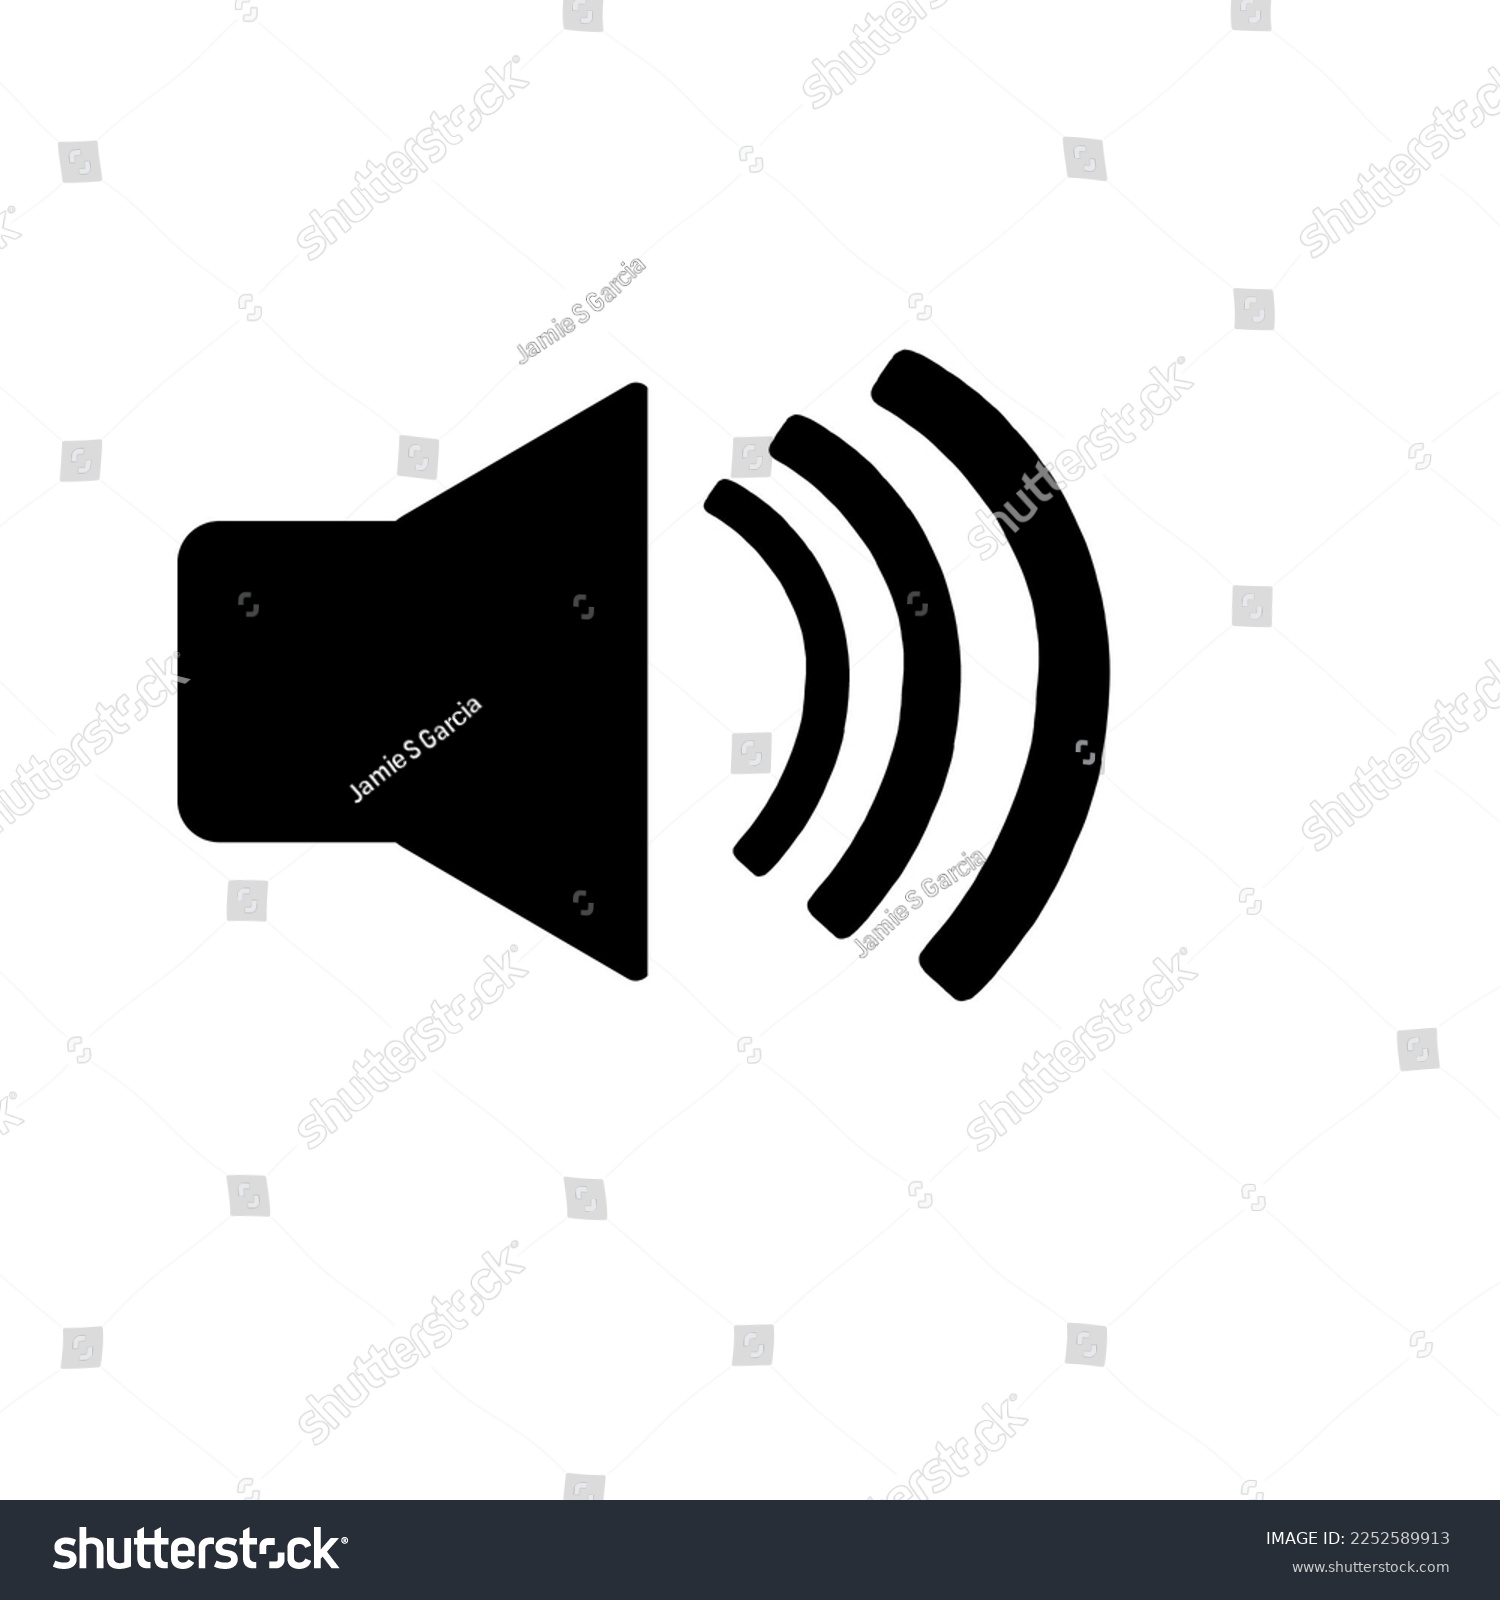 Basic sound icon or button for computer #2252589913